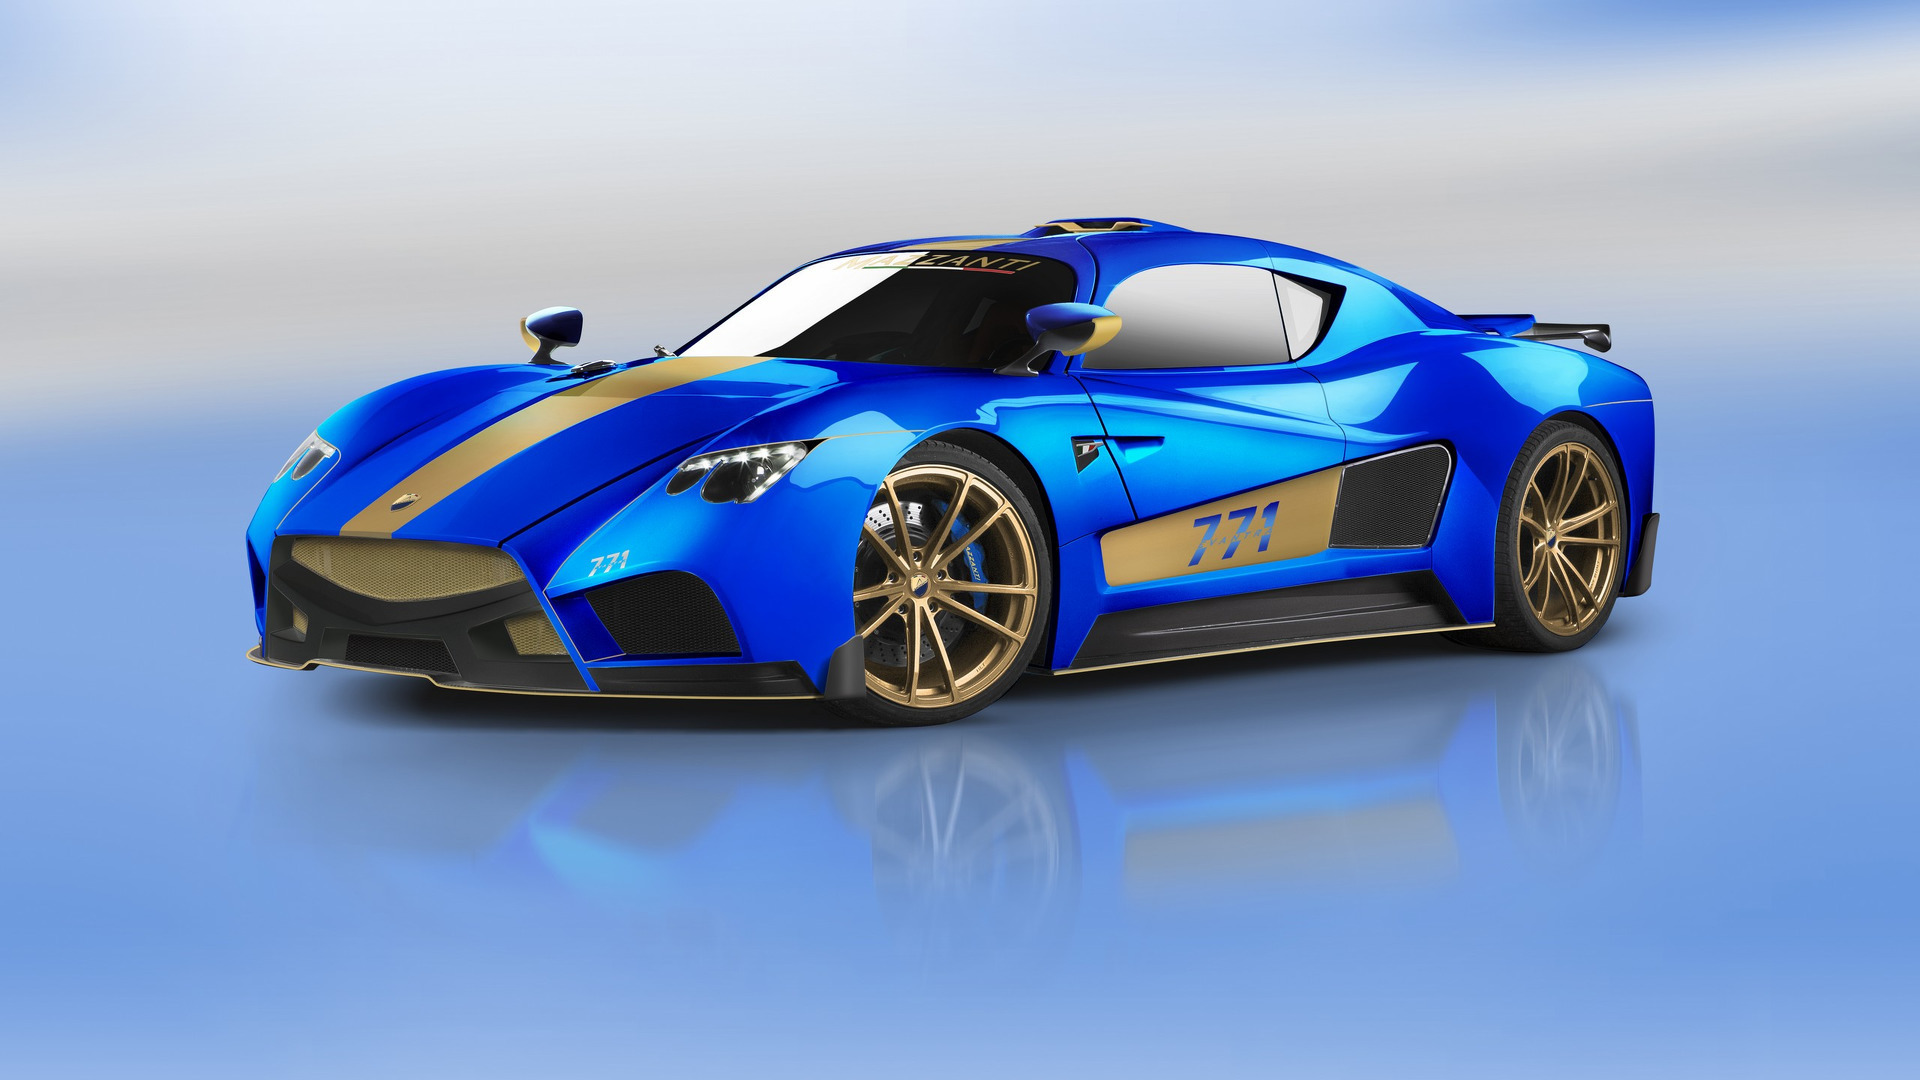 mazzanti-evantra-771-wallpapers-images-photos-pictures-backgrounds